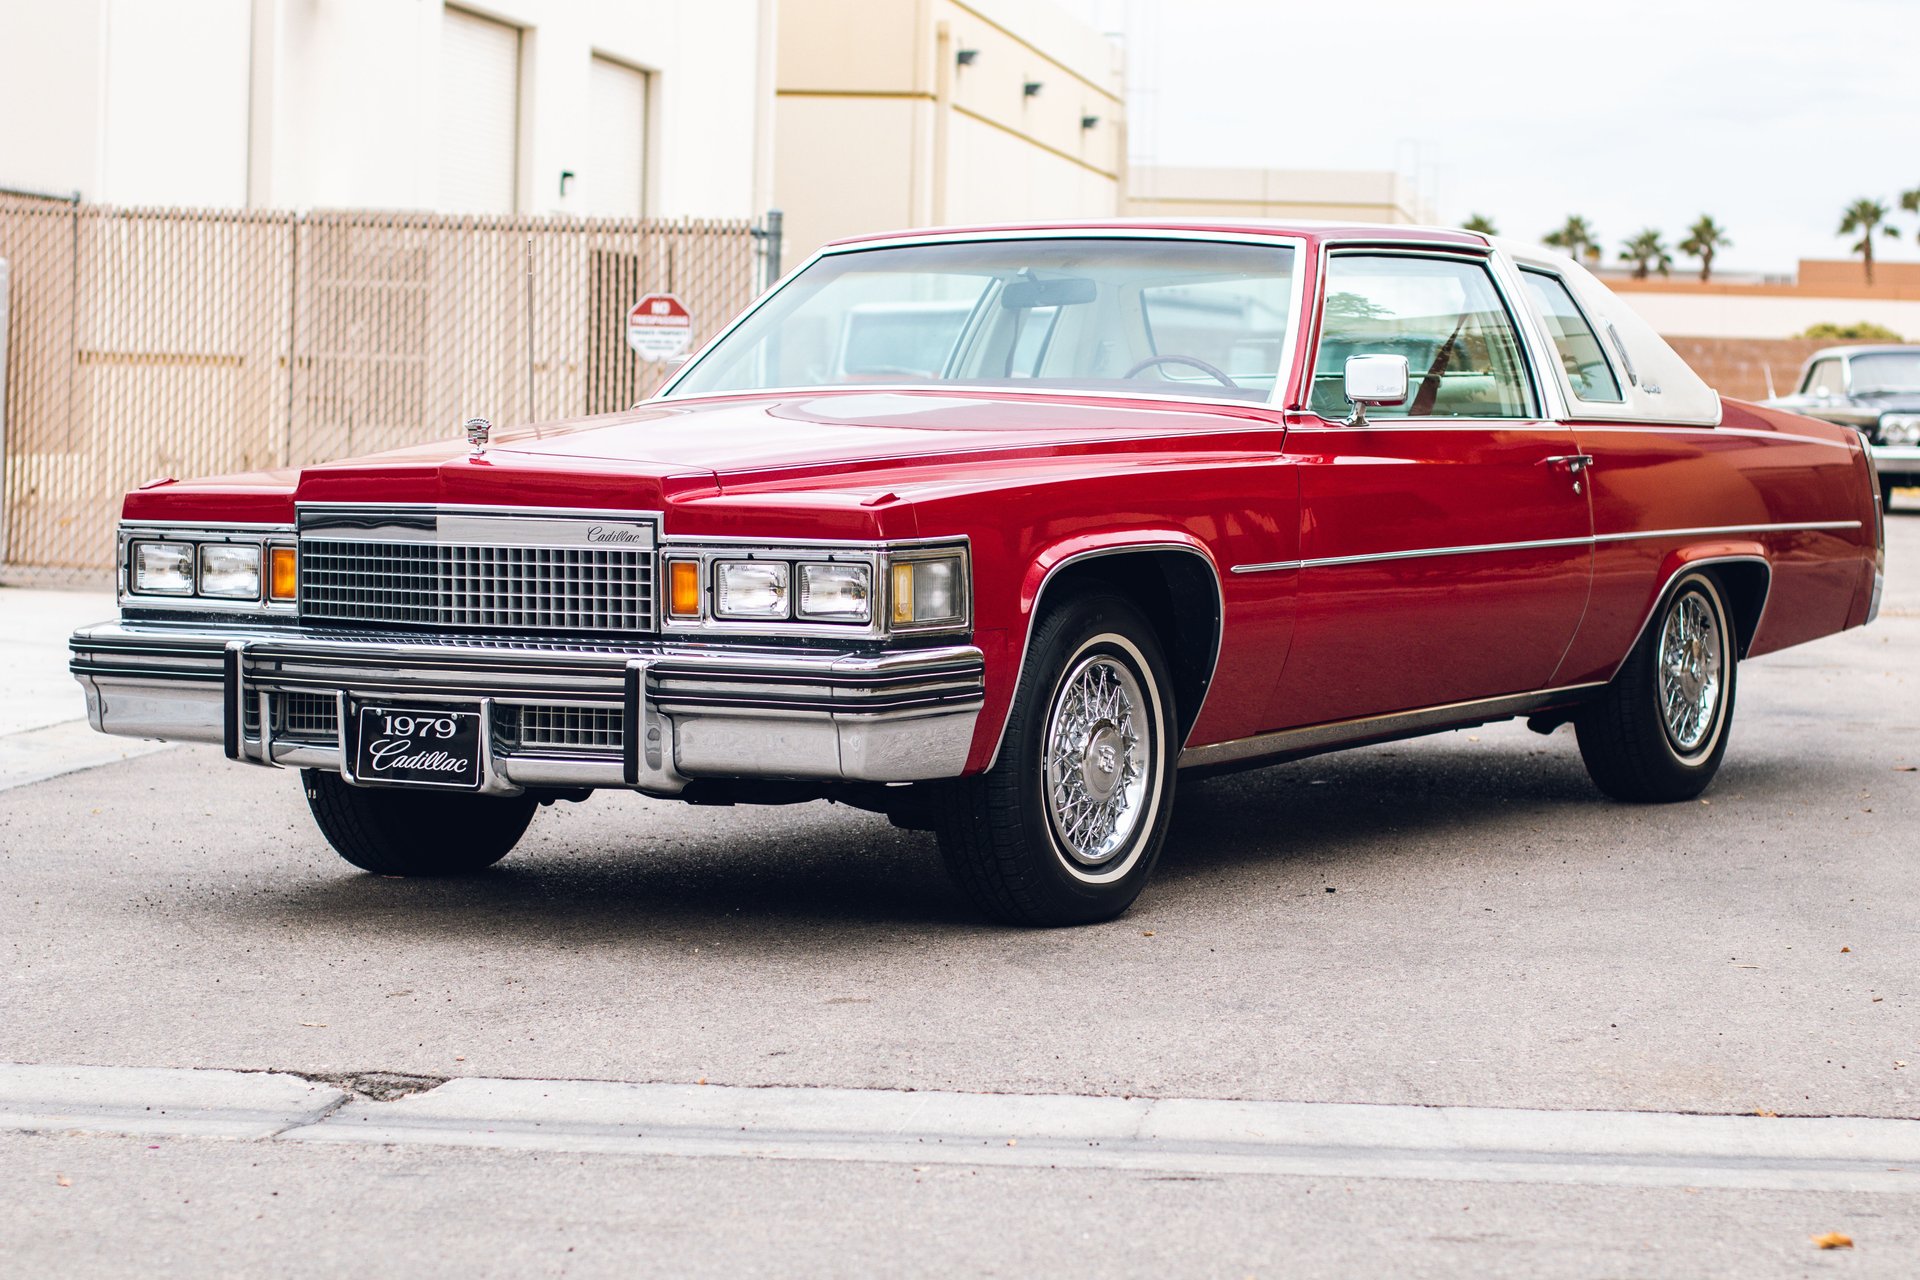 1979 Cadillac Coupe DeVille | Classic & Collector Cars